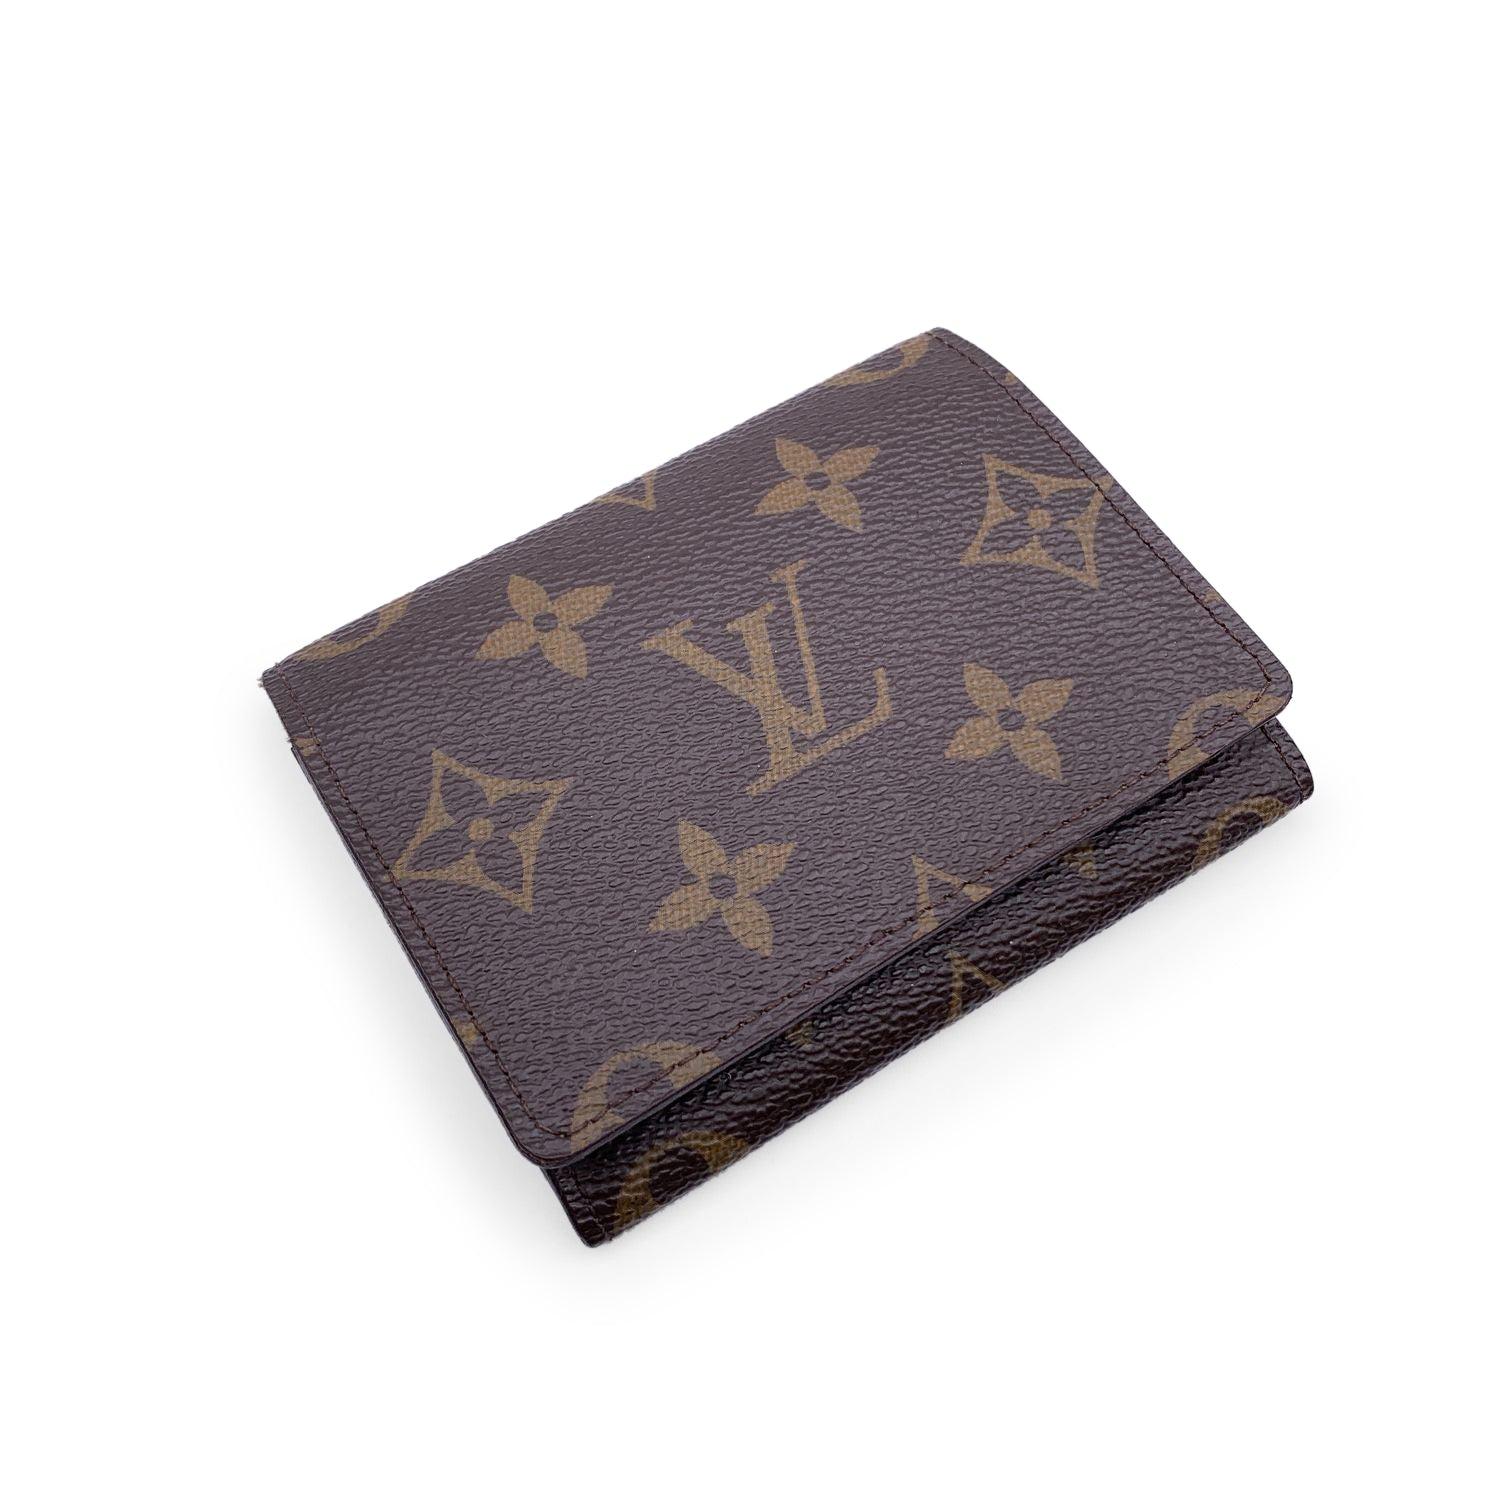 Louis Vuitton Business Card Holder. Crafted in brown monogram canvas. Tan leather lining. 3 open pockets. 'Louis Vuitton Paris - Made in Spain' embossed inside. Authenticity serial number embossed inside Details MATERIAL: Cloth COLOR: Brown MODEL: